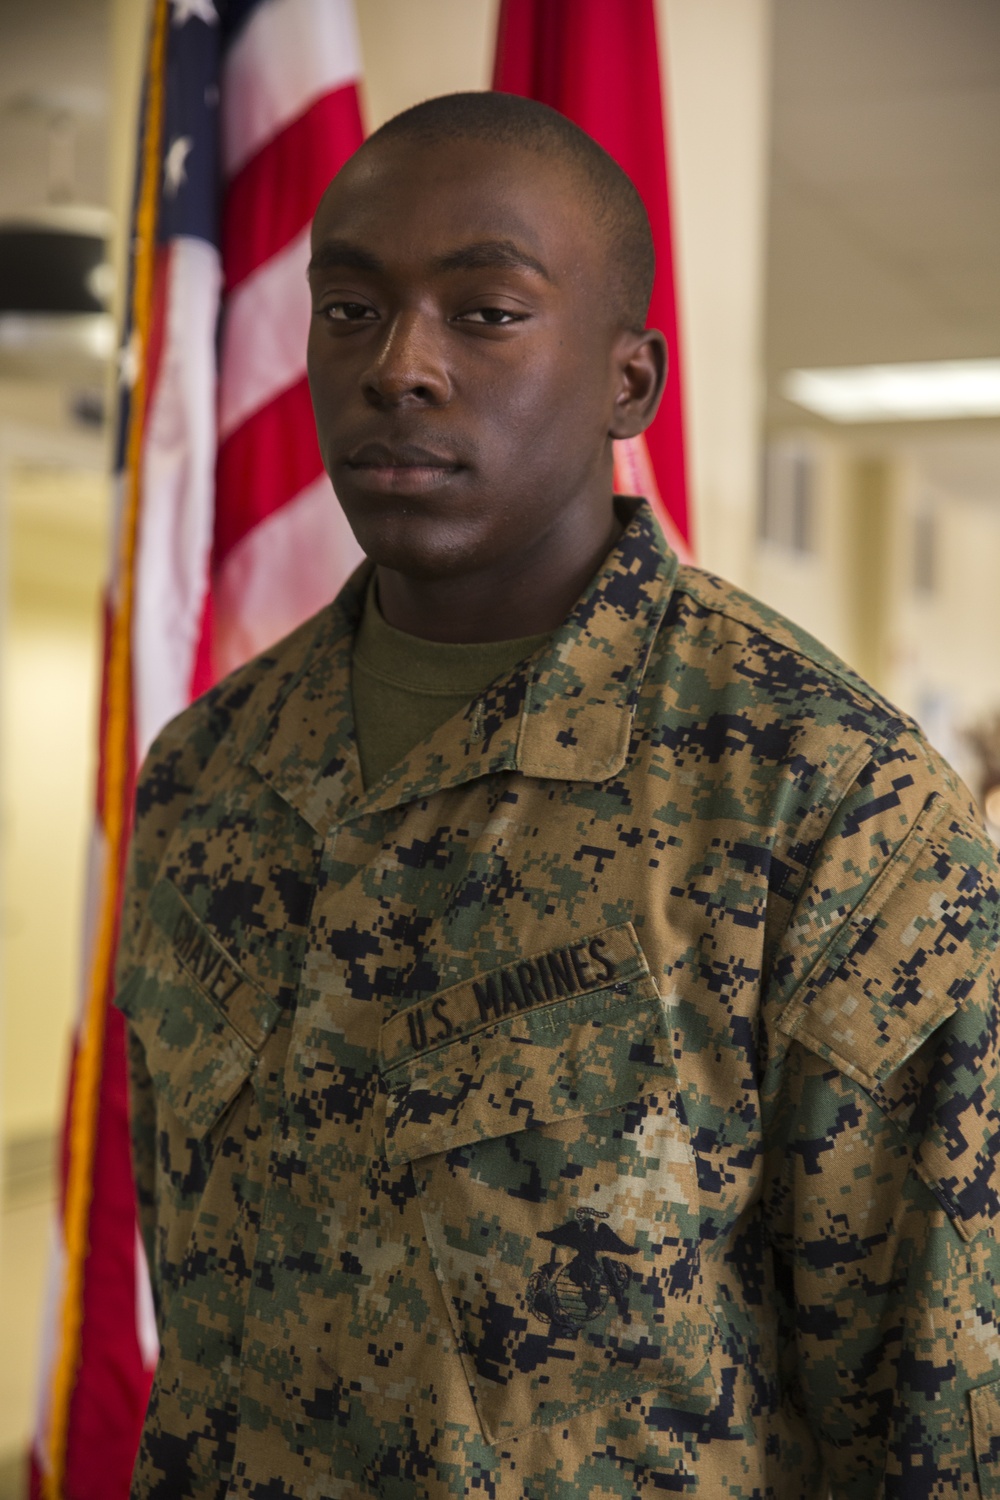 Dangriga, Belize, native training at Parris Island to become US Marine